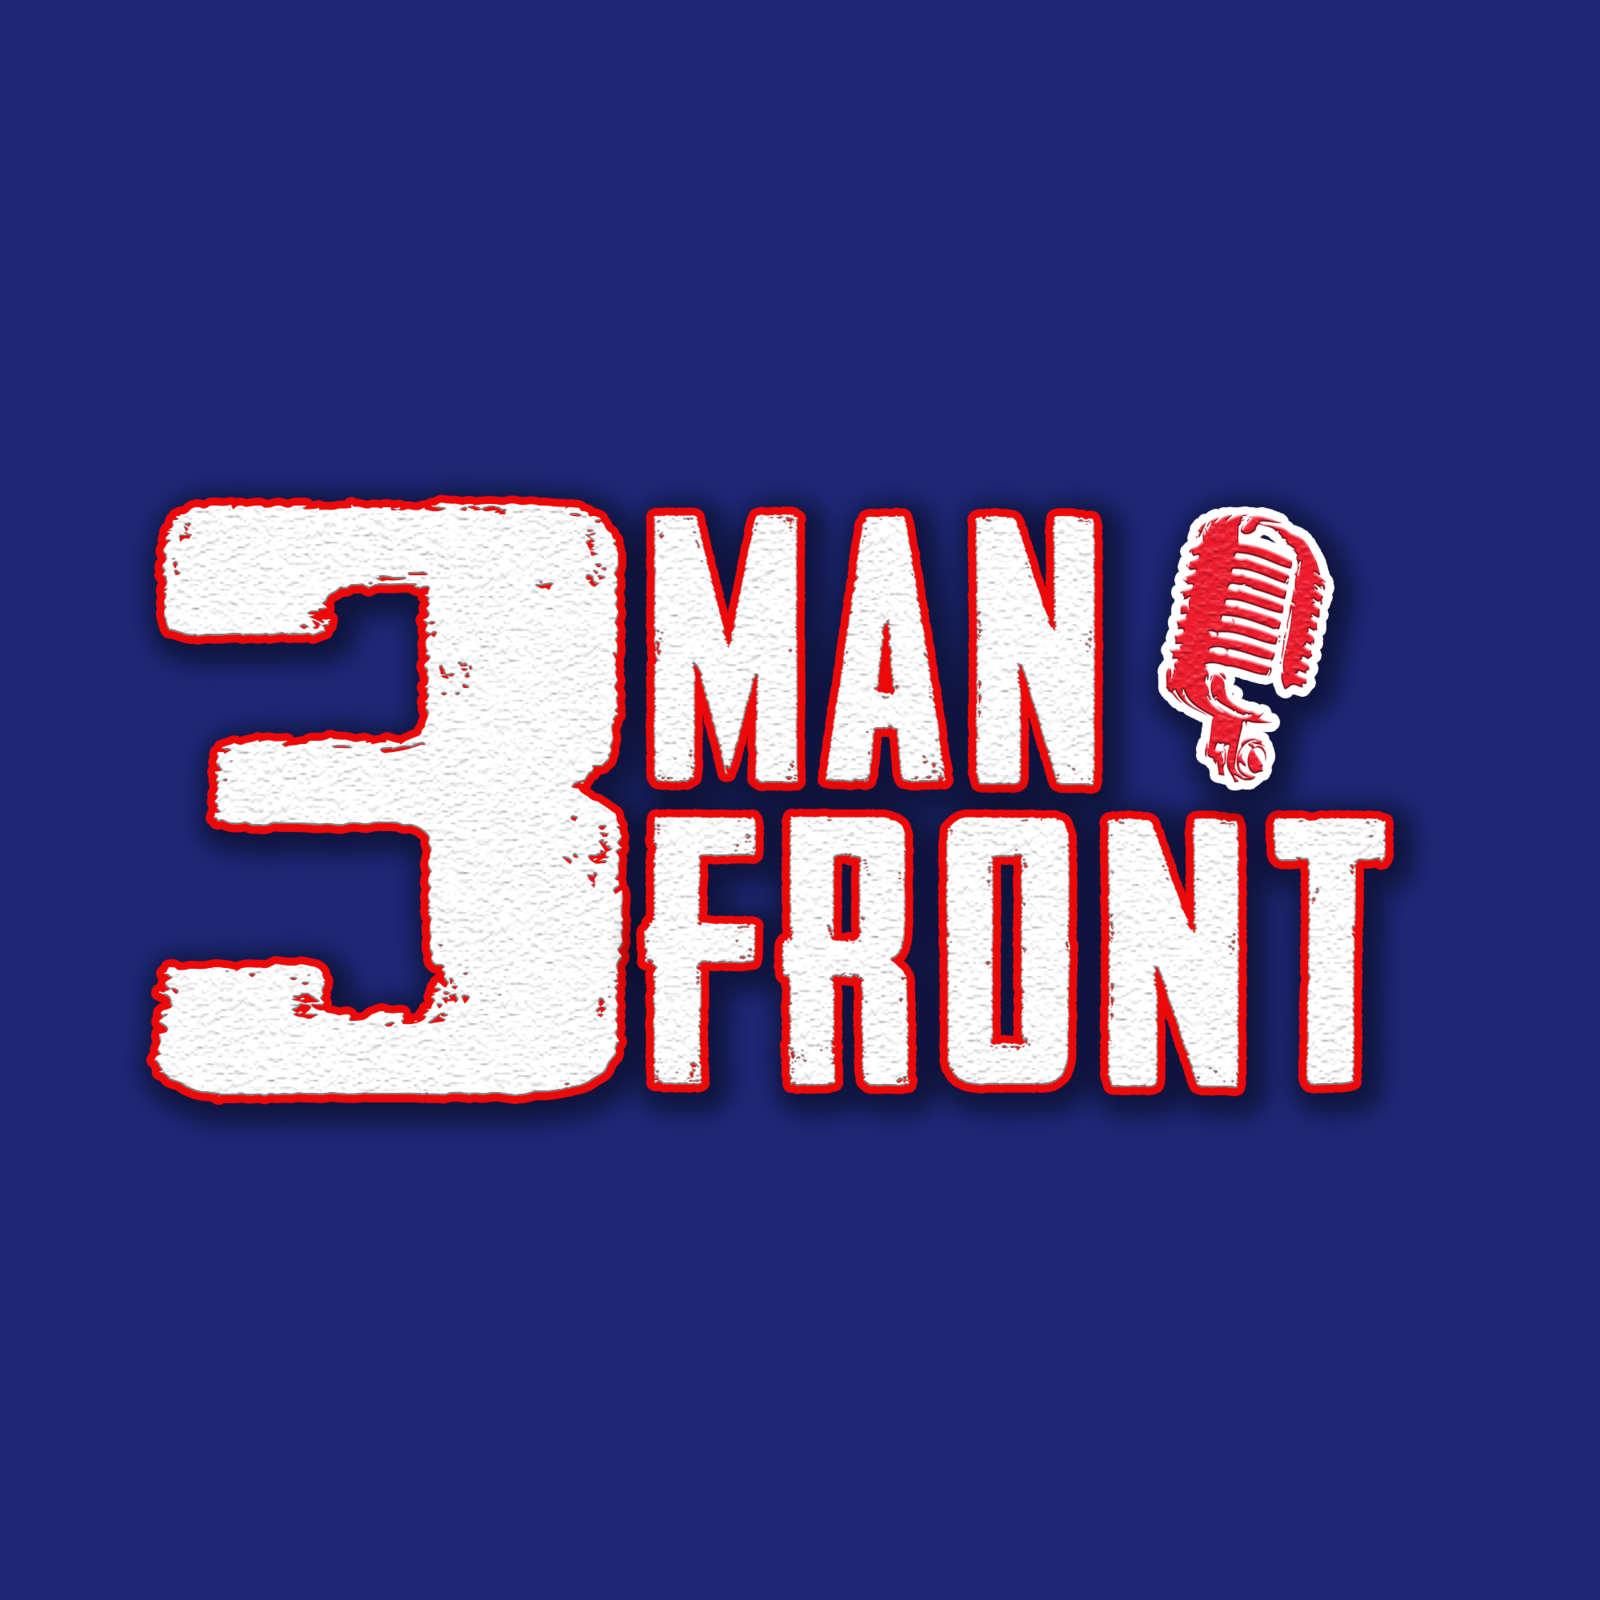 6-12-24 3 Man Front Hour 2: Mike Griffith on the CFP, ACC to the SEC, and your reaction!